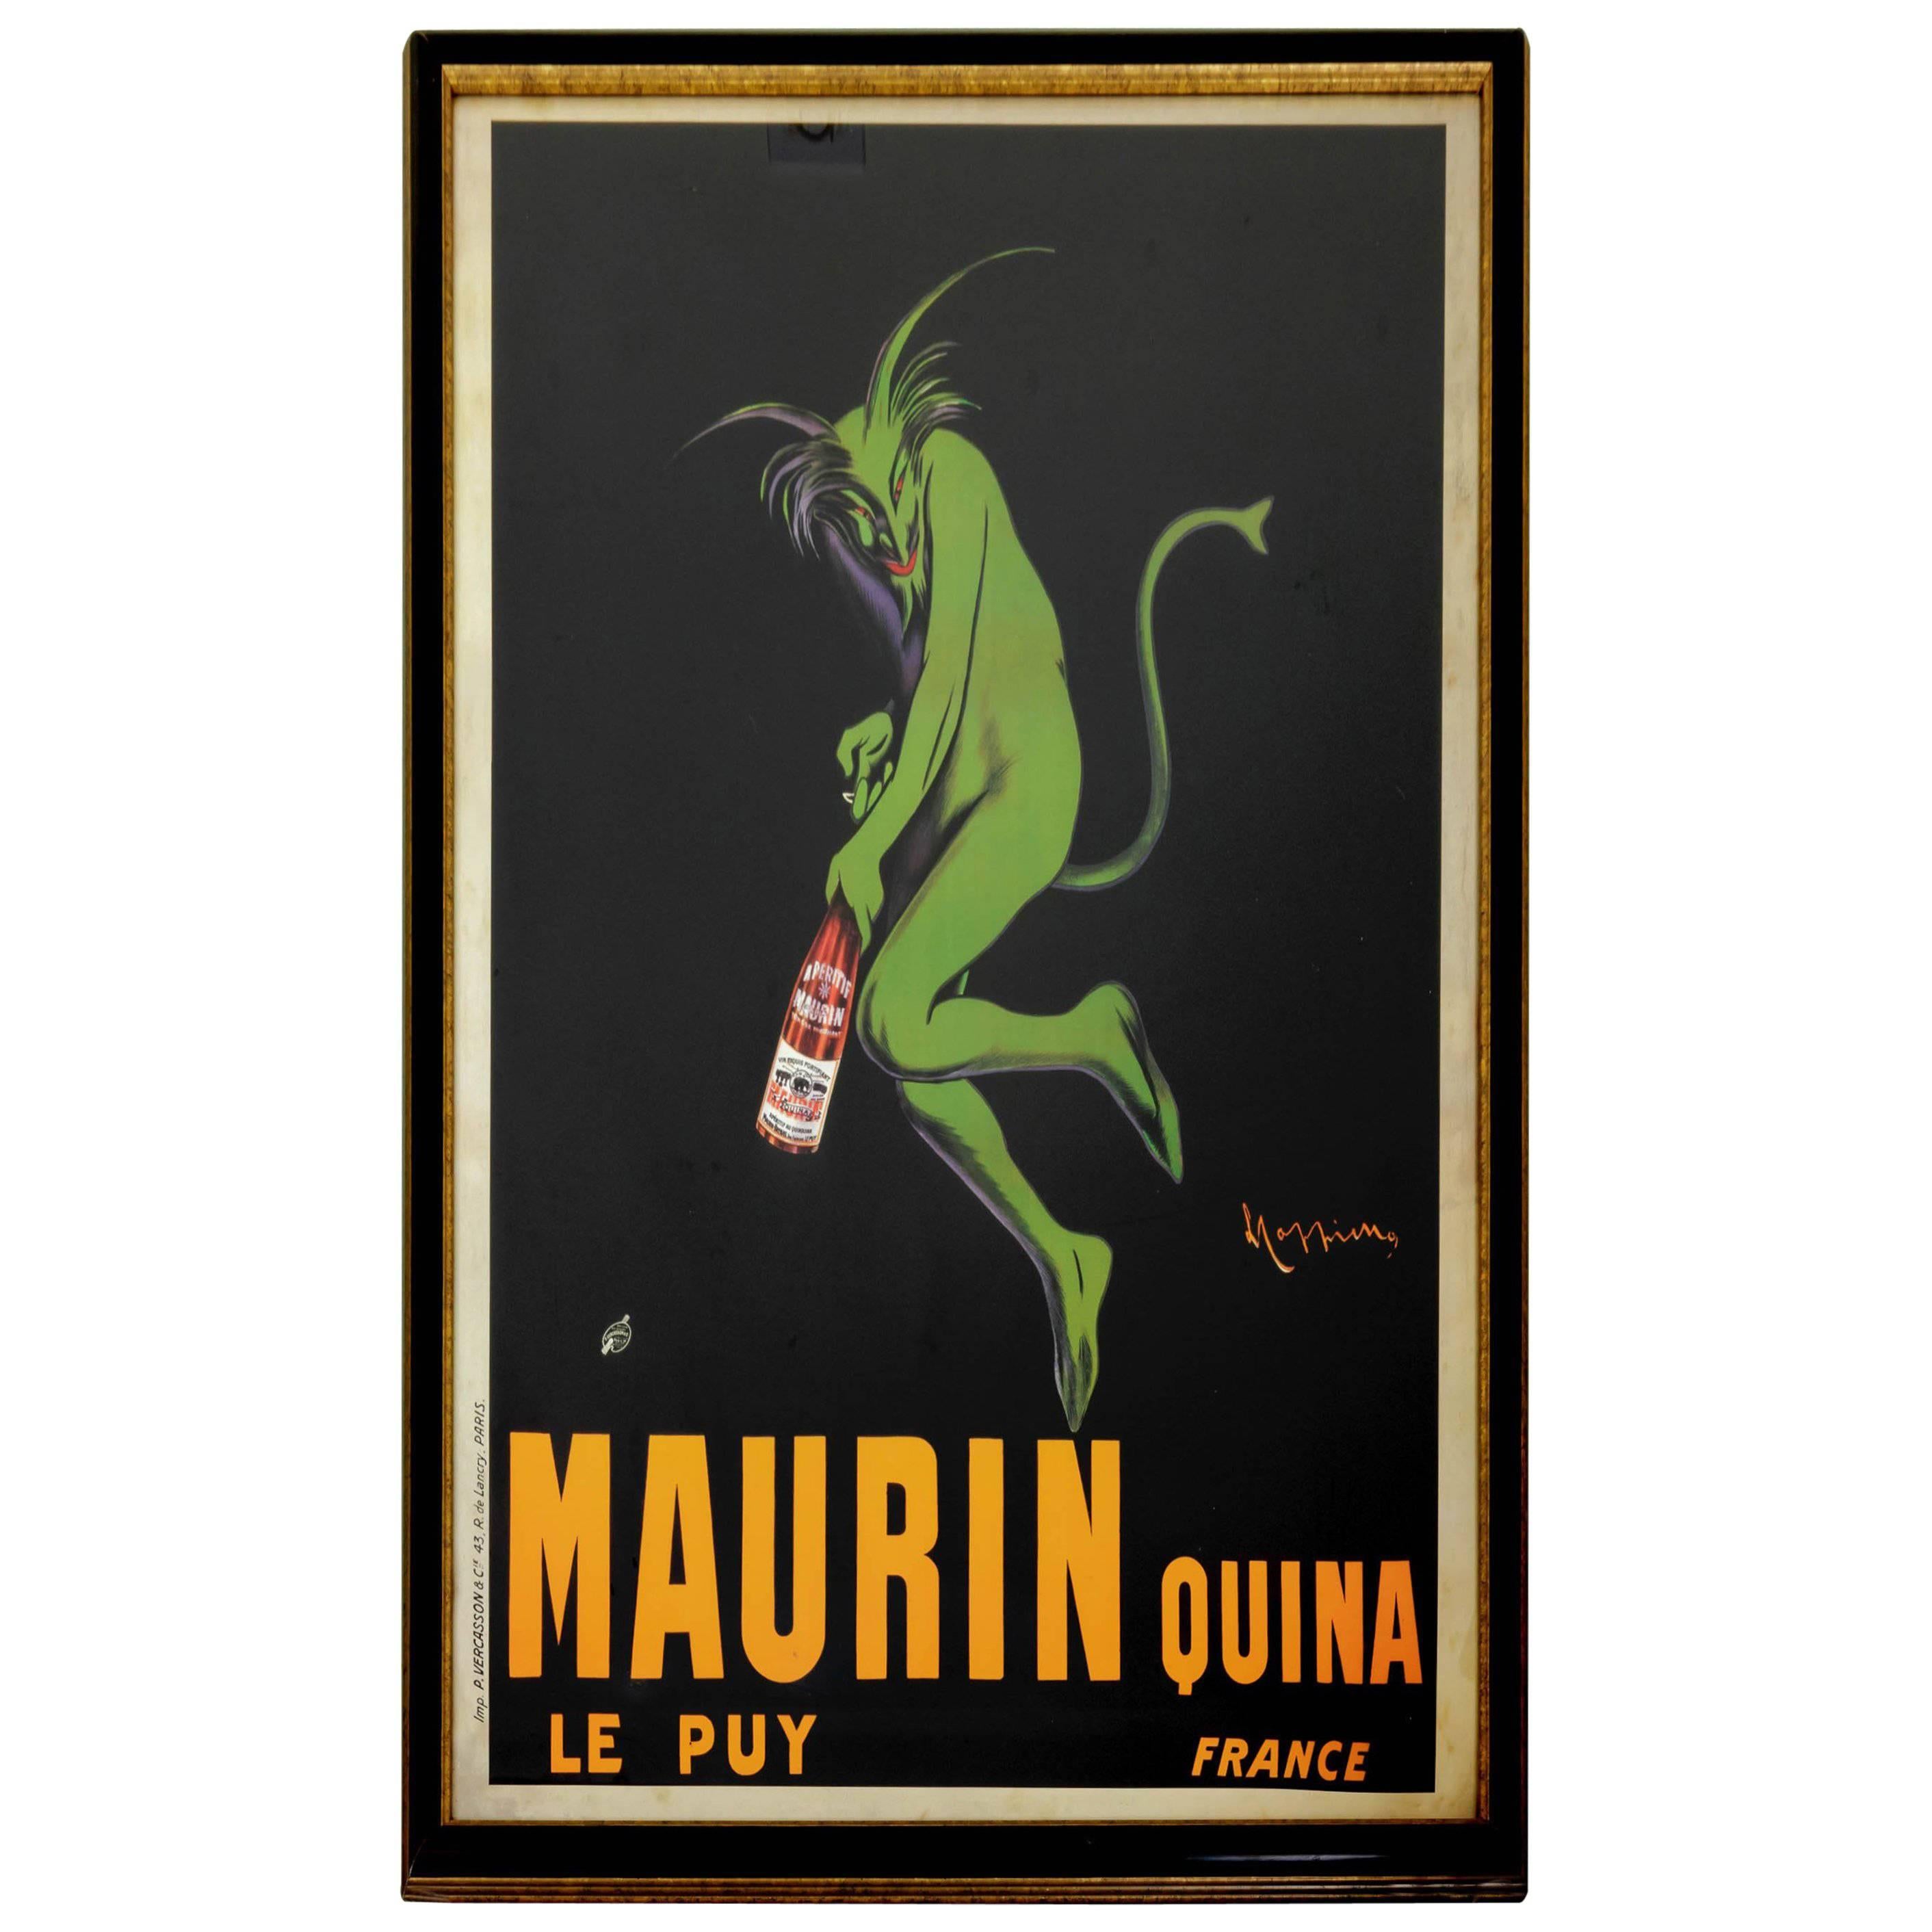 Maurin Quina Le Puy France Poster